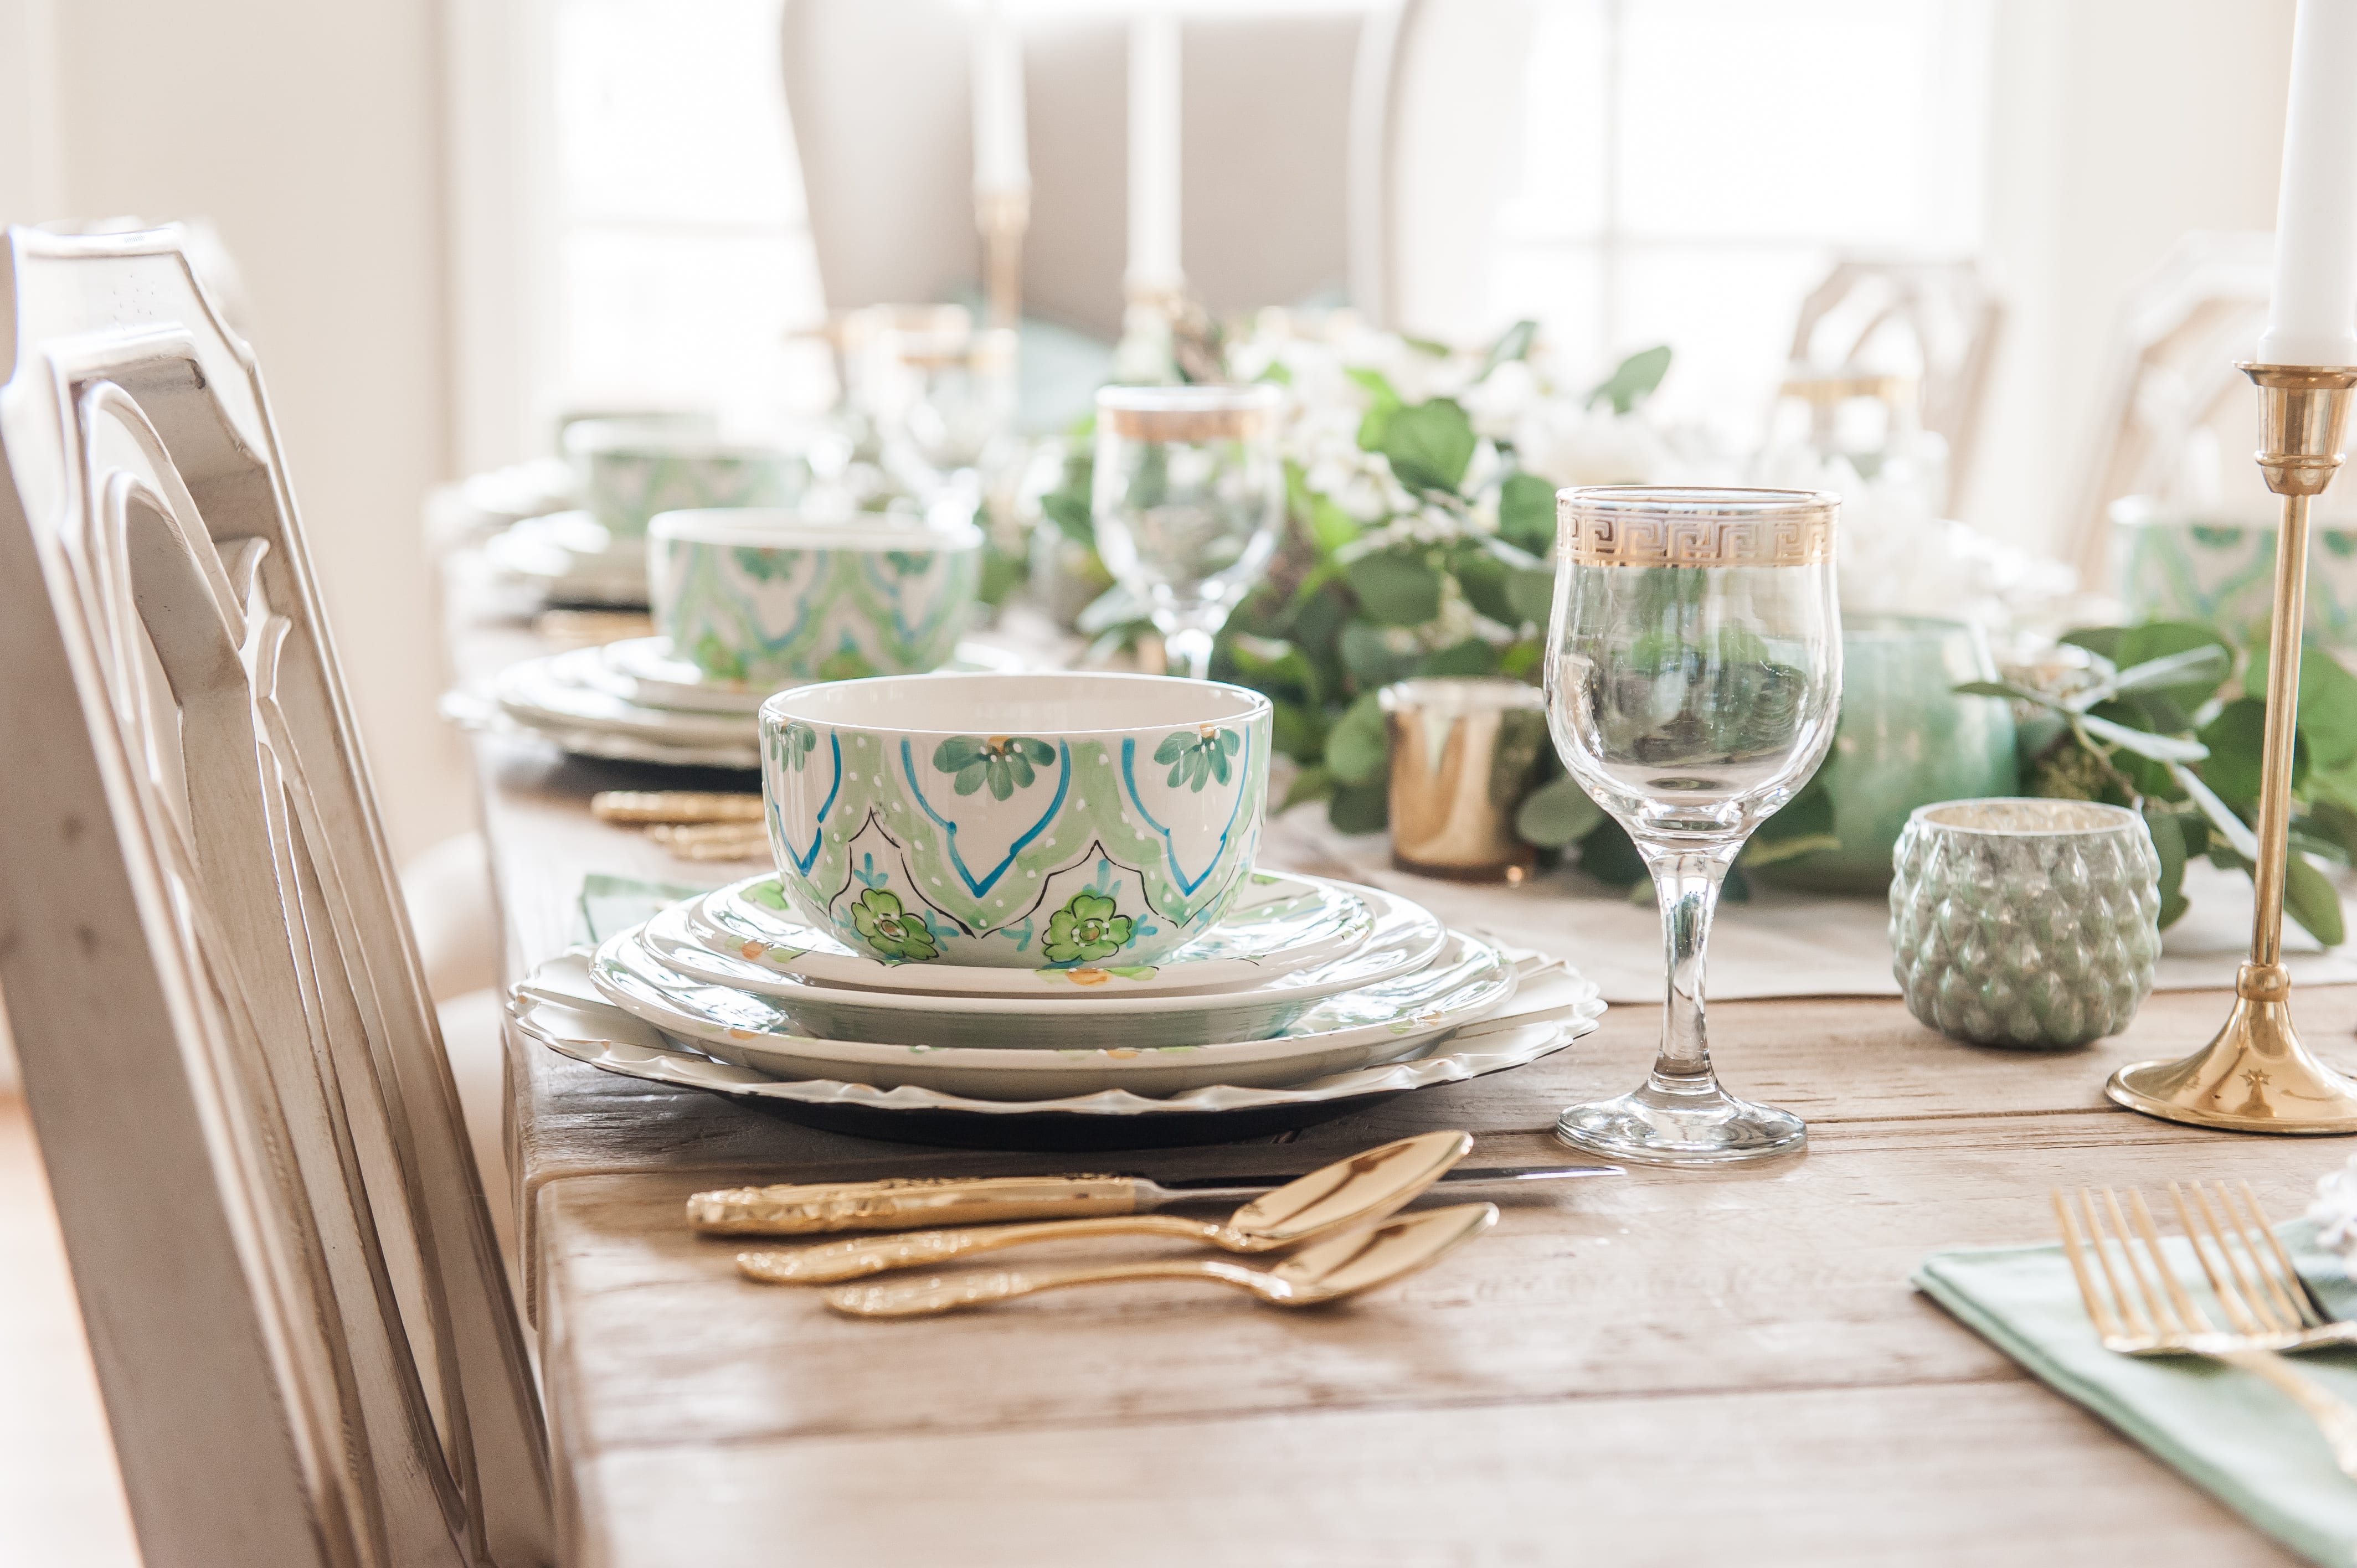 Tablescape spring Tablescapes st. patricks day table decor blue green and white table setting dinnerware easter tablescape easter dinner table dining room table setting place setting table decor idea